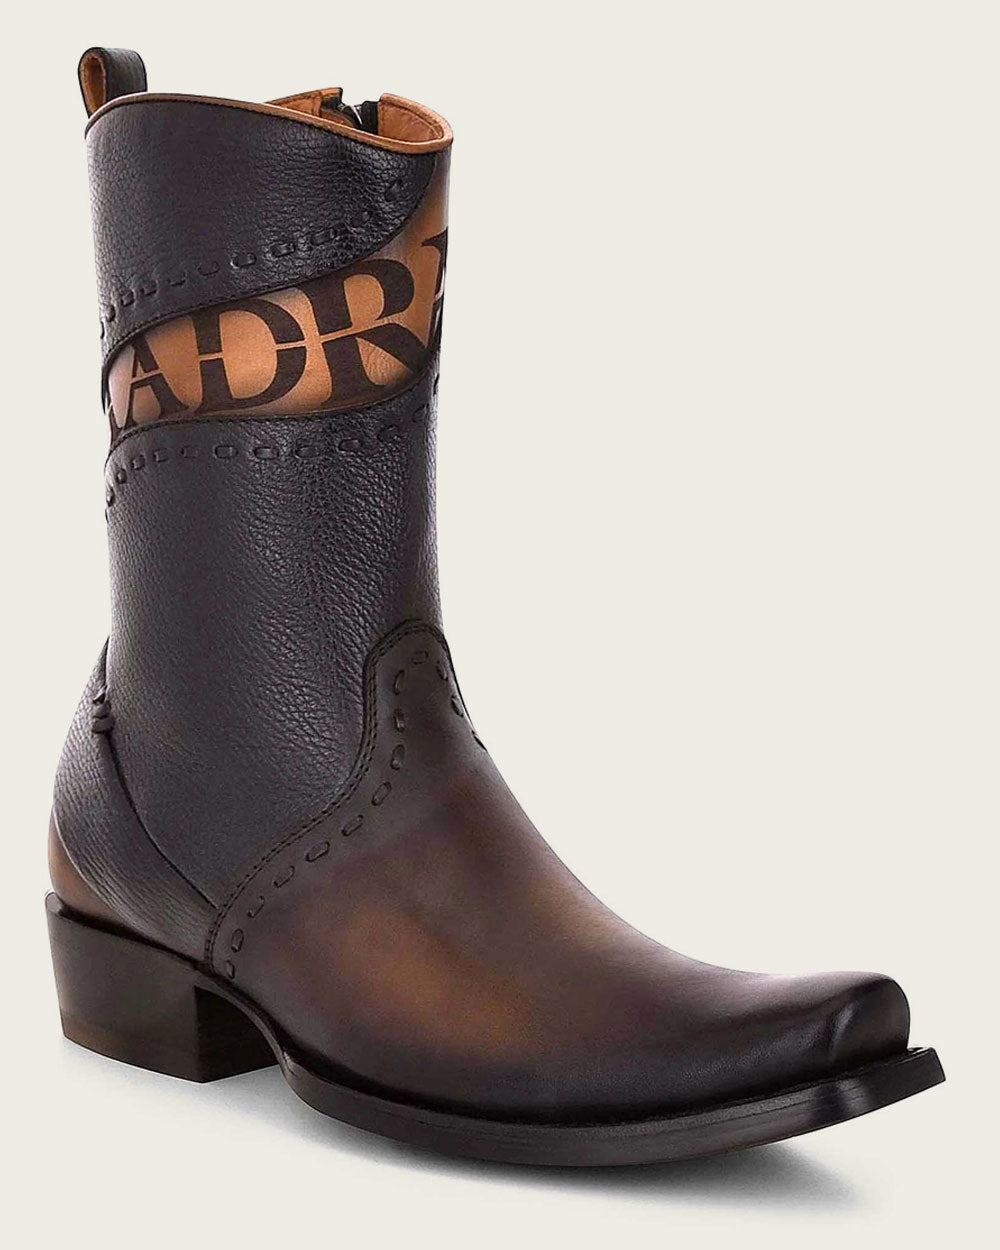 Engraved Details & Handwoven Accents: Cuadra boots stand out with unique touches.